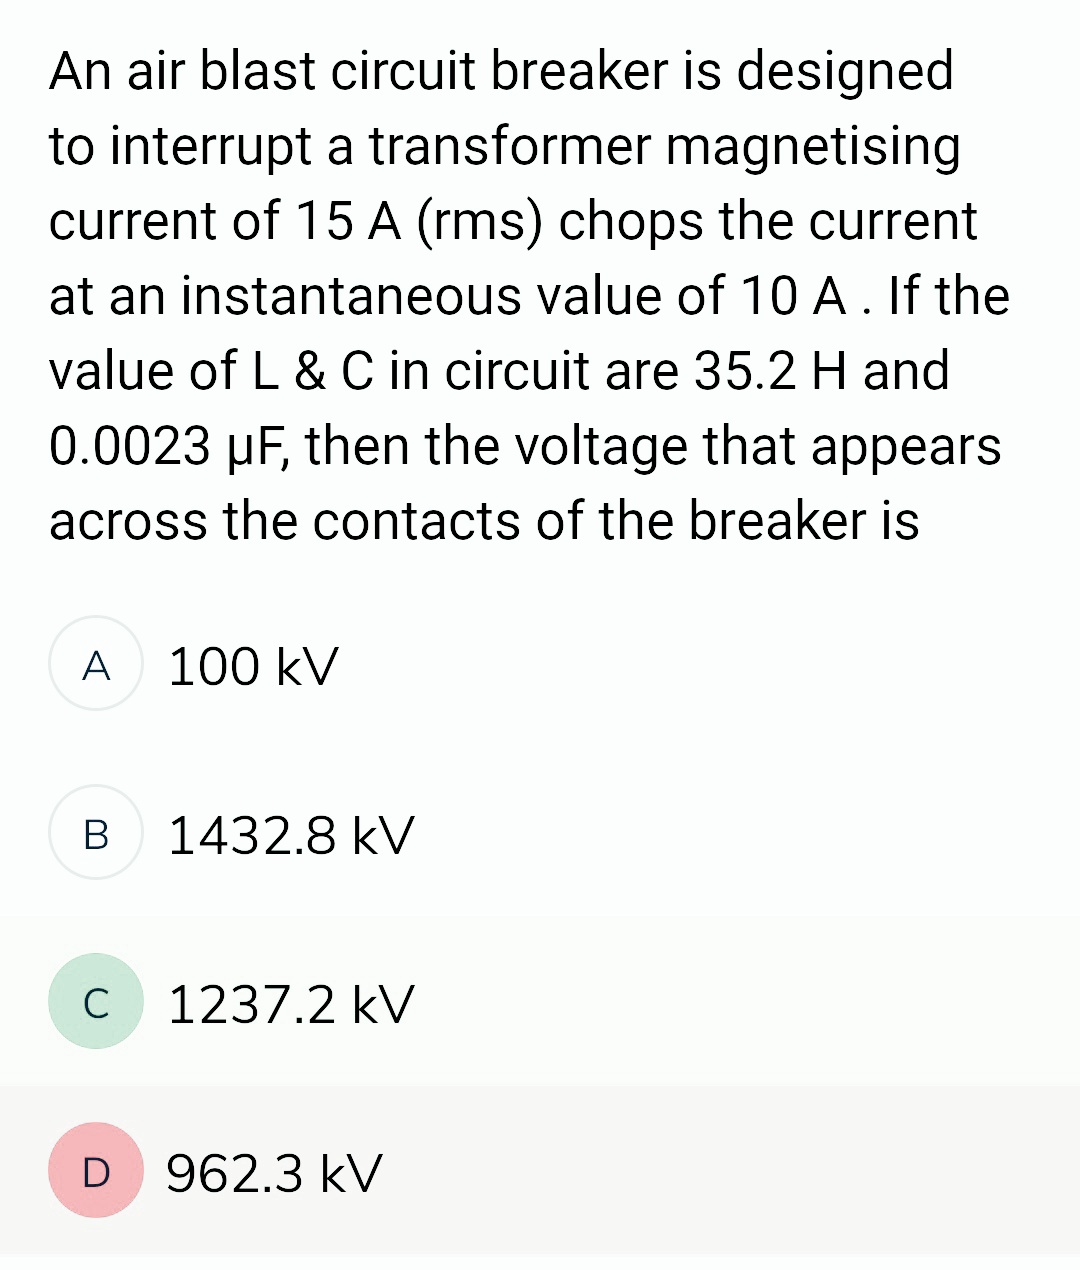 An air blast circuit breaker is designed
to interrupt a transformer magnetising
current of 15 A (rms) chops the current
at an instantaneous value of 10 A . If the
value of L & C in circuit are 35.2 H and
0.0023 µF, then the voltage that appears
across the contacts of the breaker is
A 100 kV
B
C
1432.8 kV
1237.2 kV
D 962.3 kV